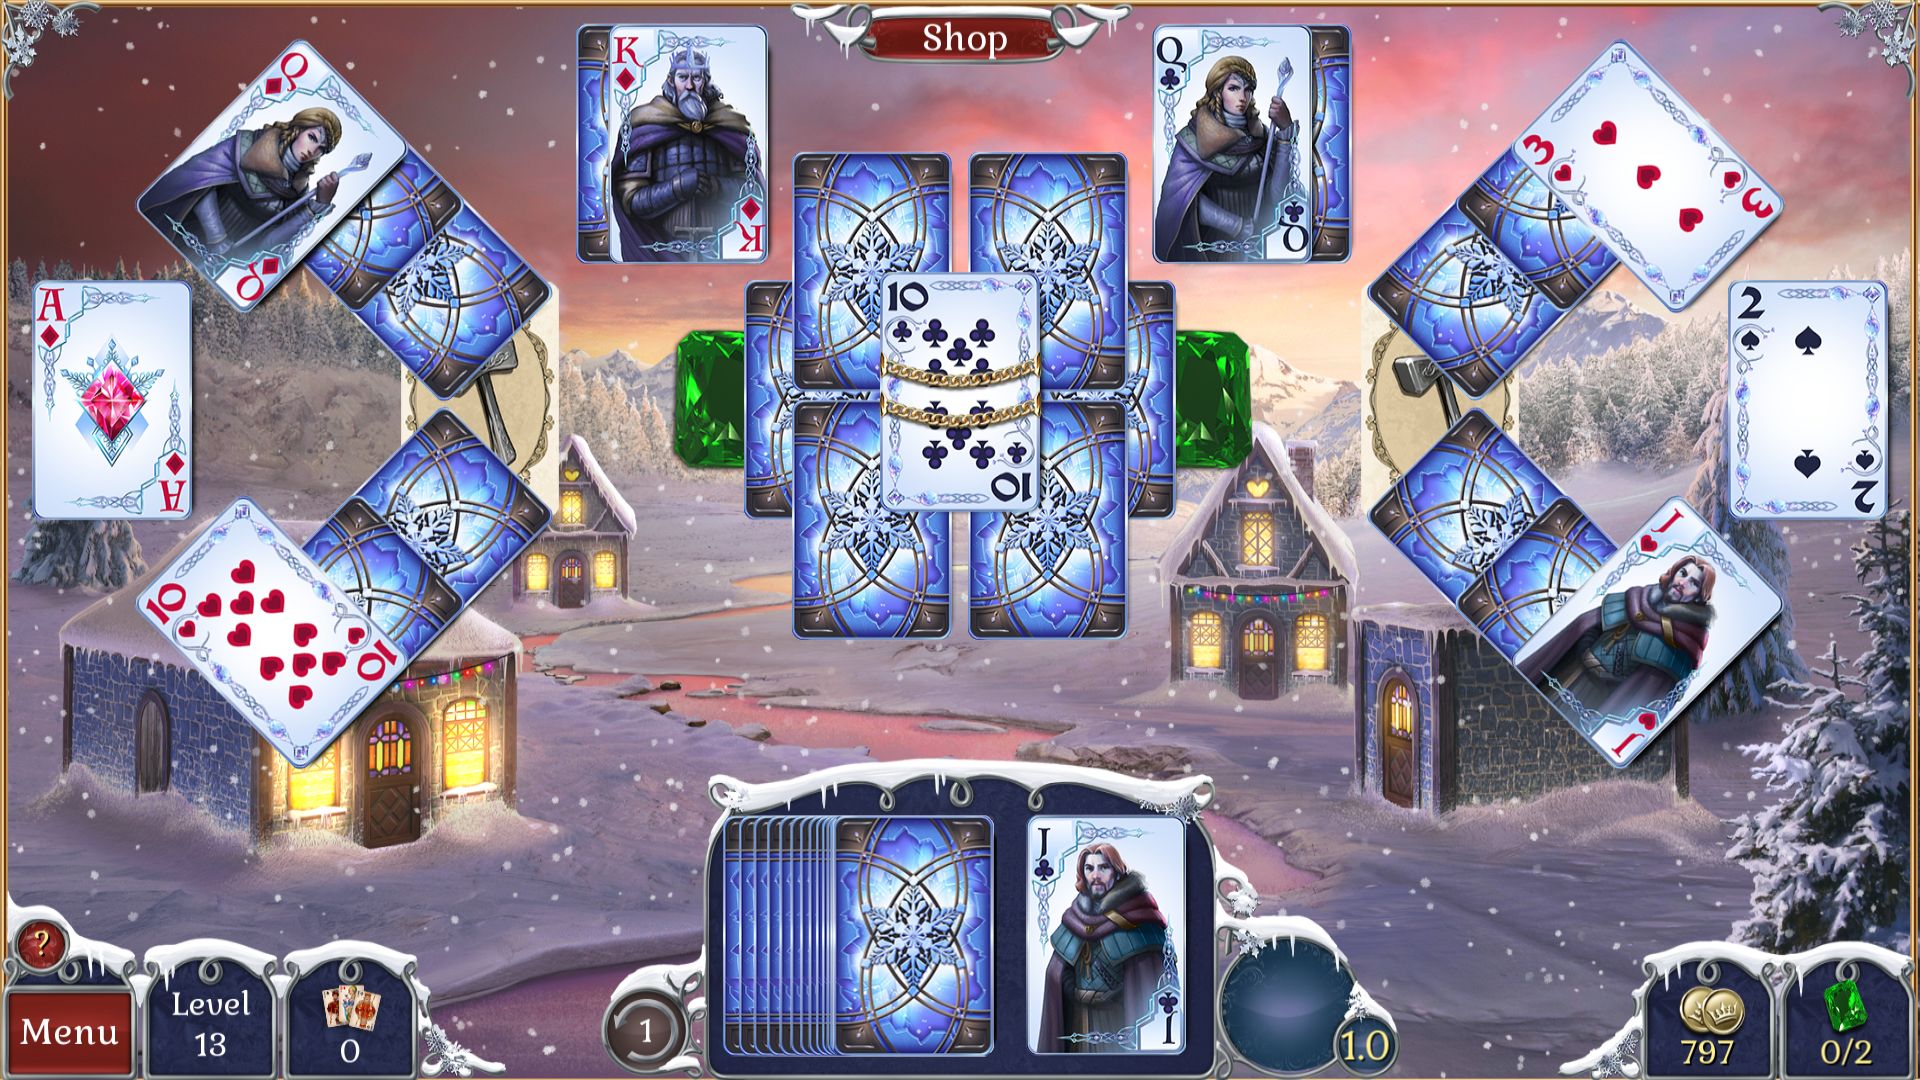 Jewel Match Solitaire Winterscapes Steam CD Key, $1.54